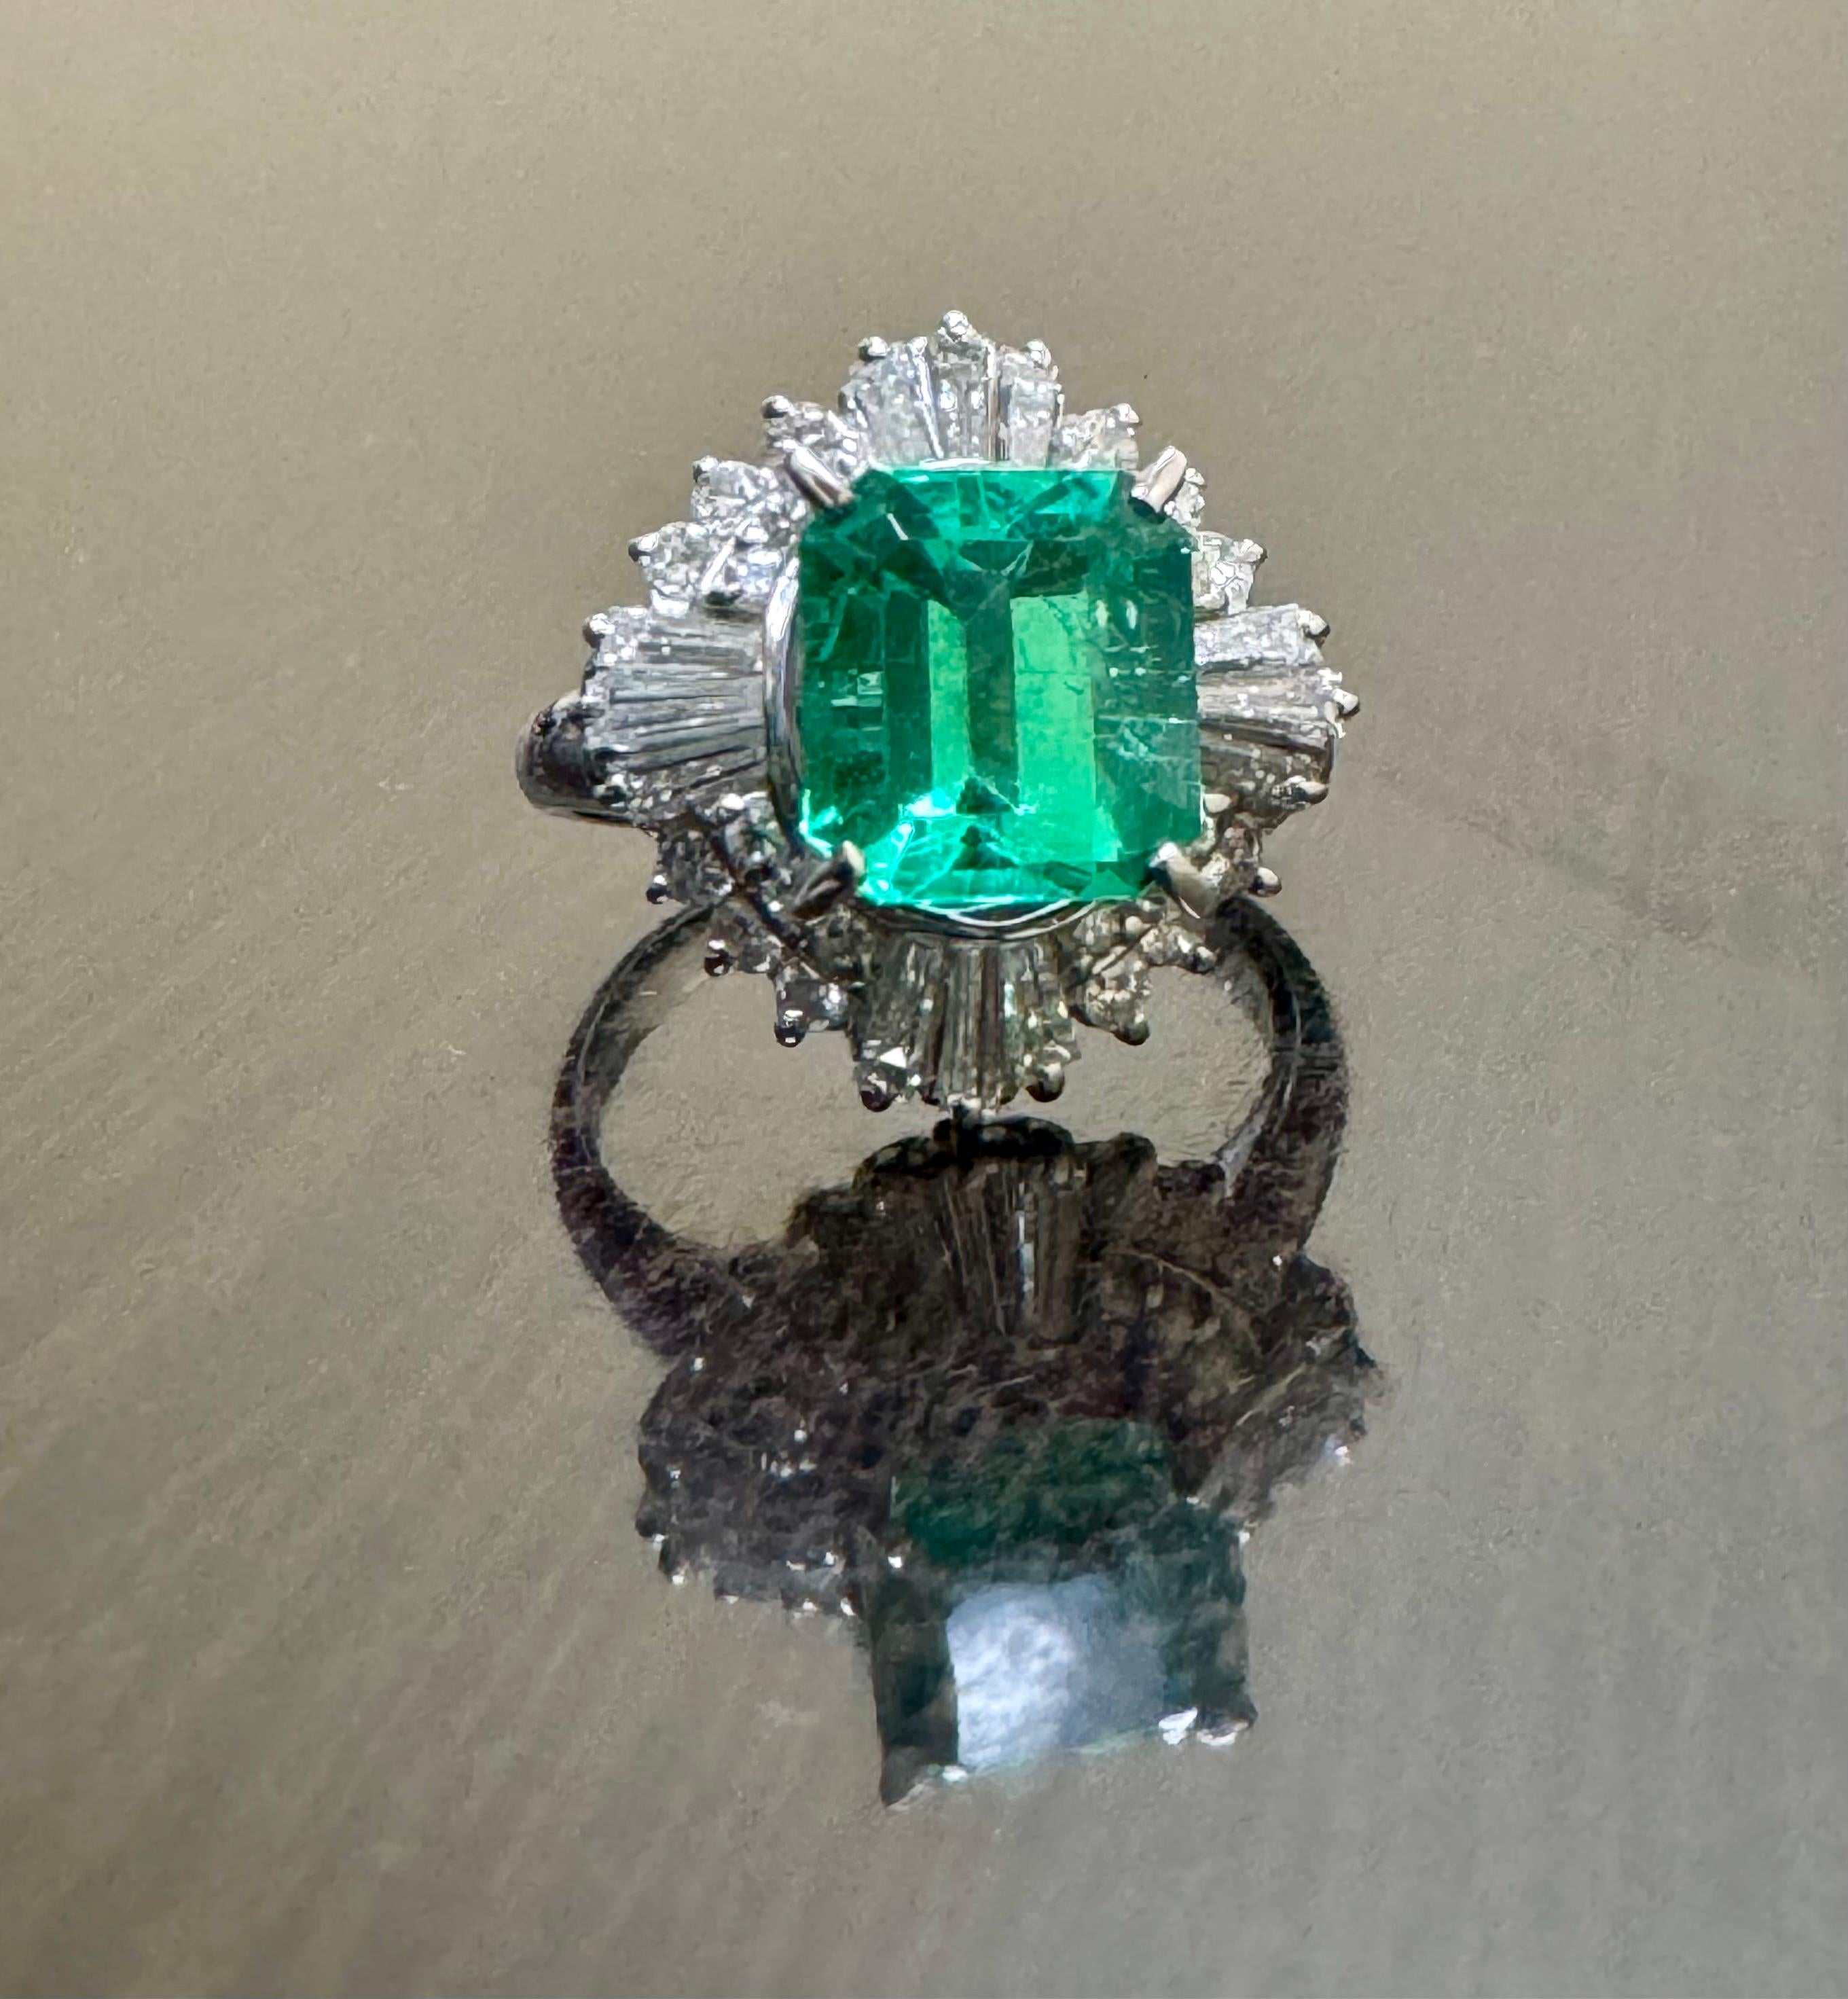 Platinum Art Deco Baguette Diamond 2.58 Carat Colombian Emerald Engagement Ring In New Condition For Sale In Los Angeles, CA